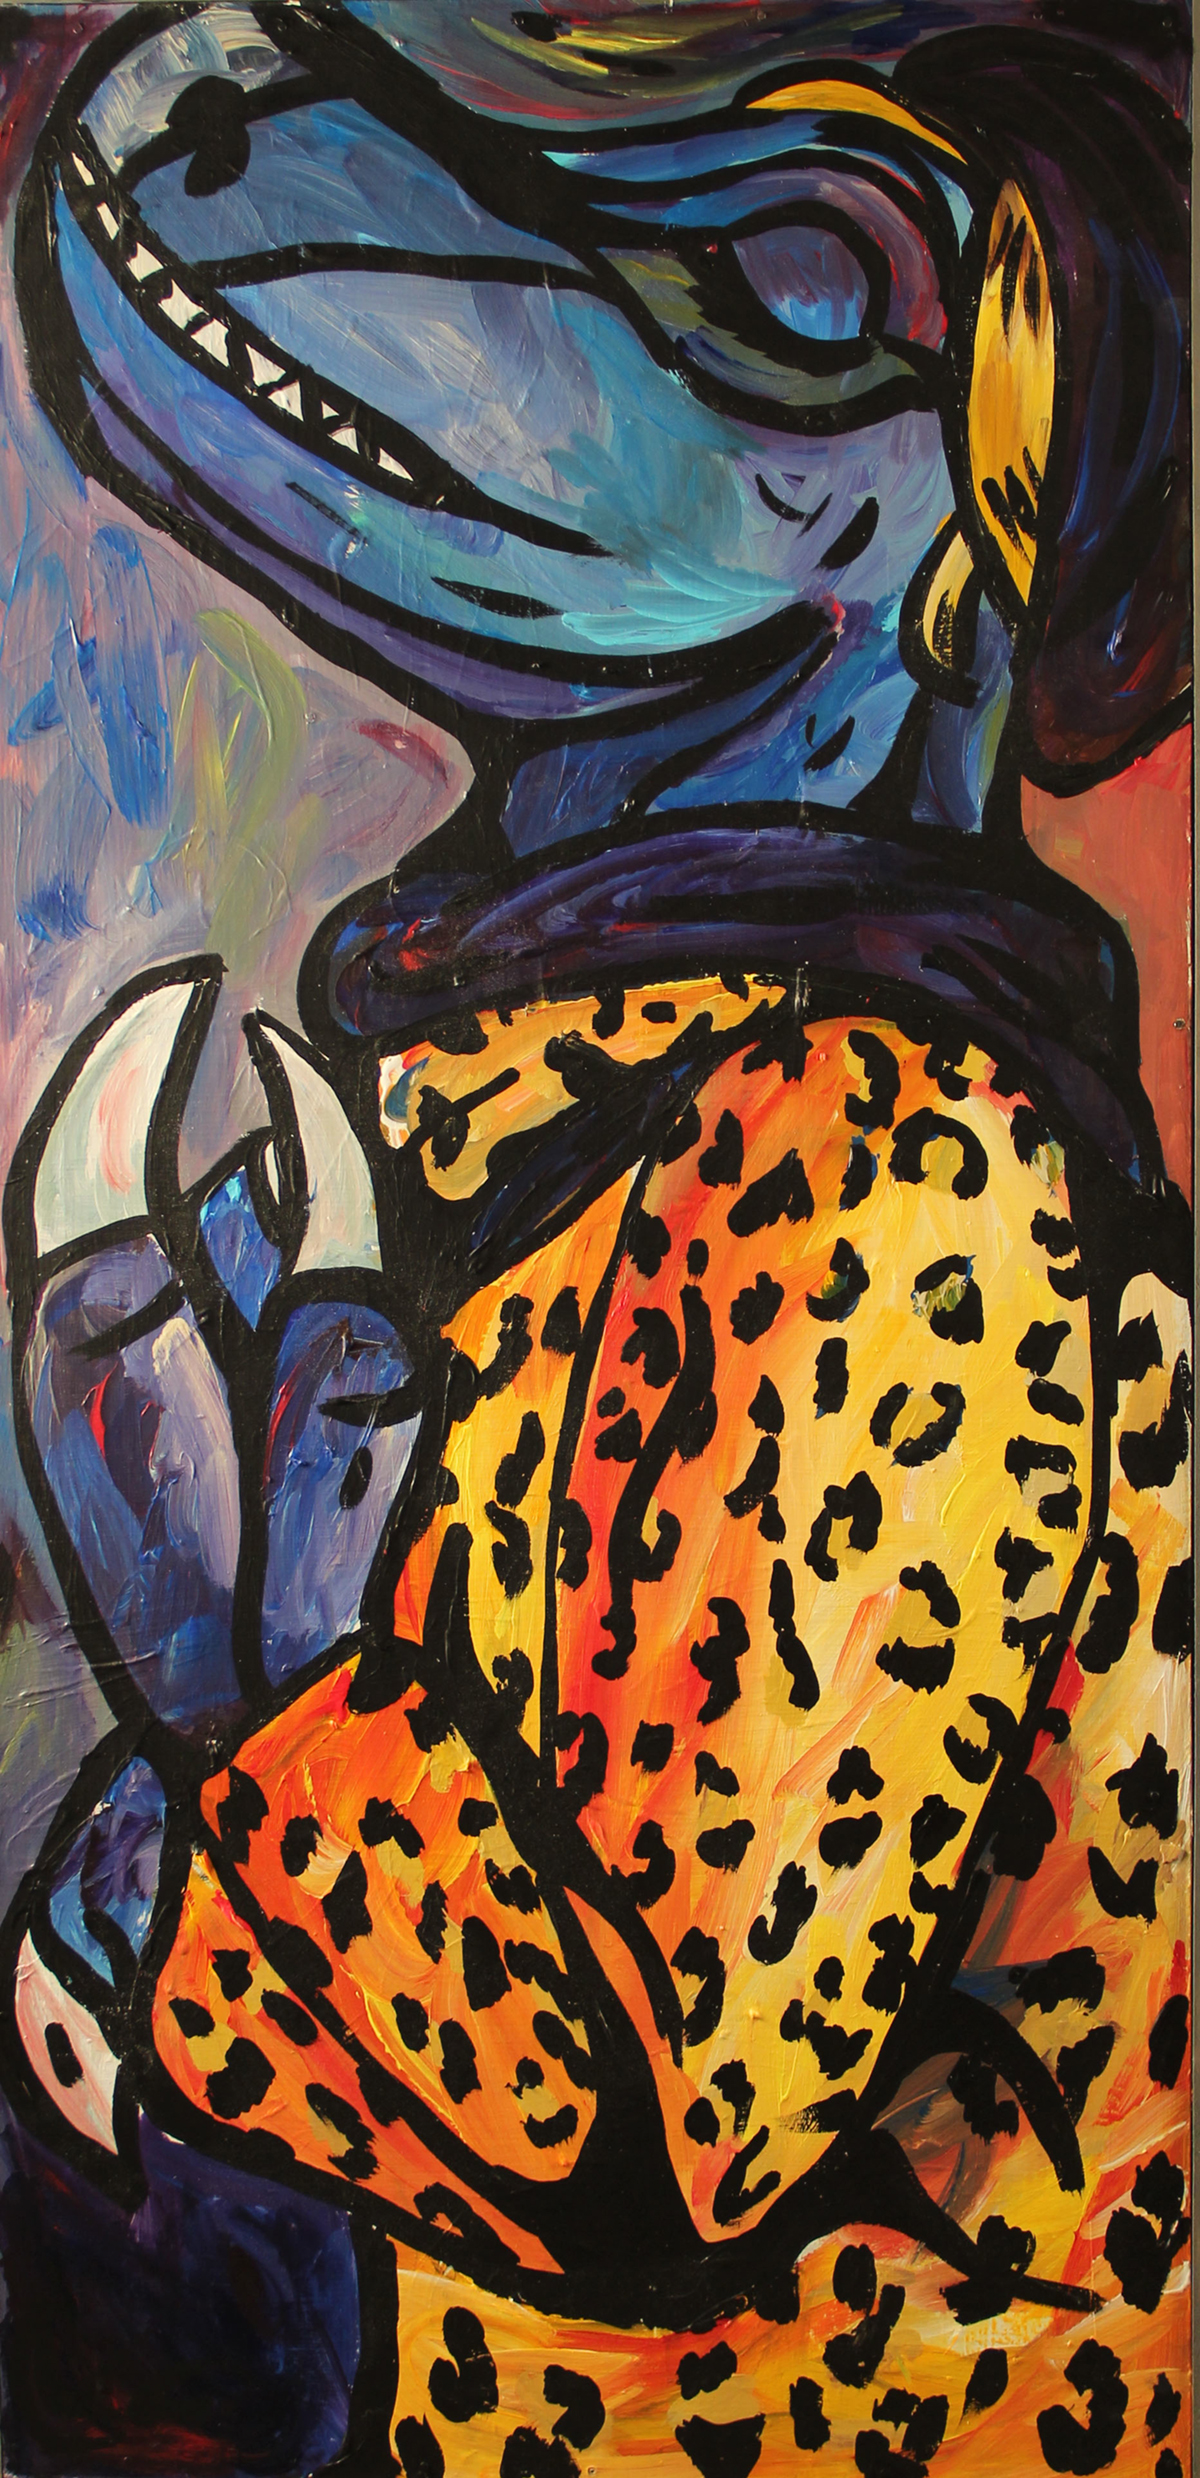 A dinosaur in a cheetah-print jacket. Painting by Courtney Huston